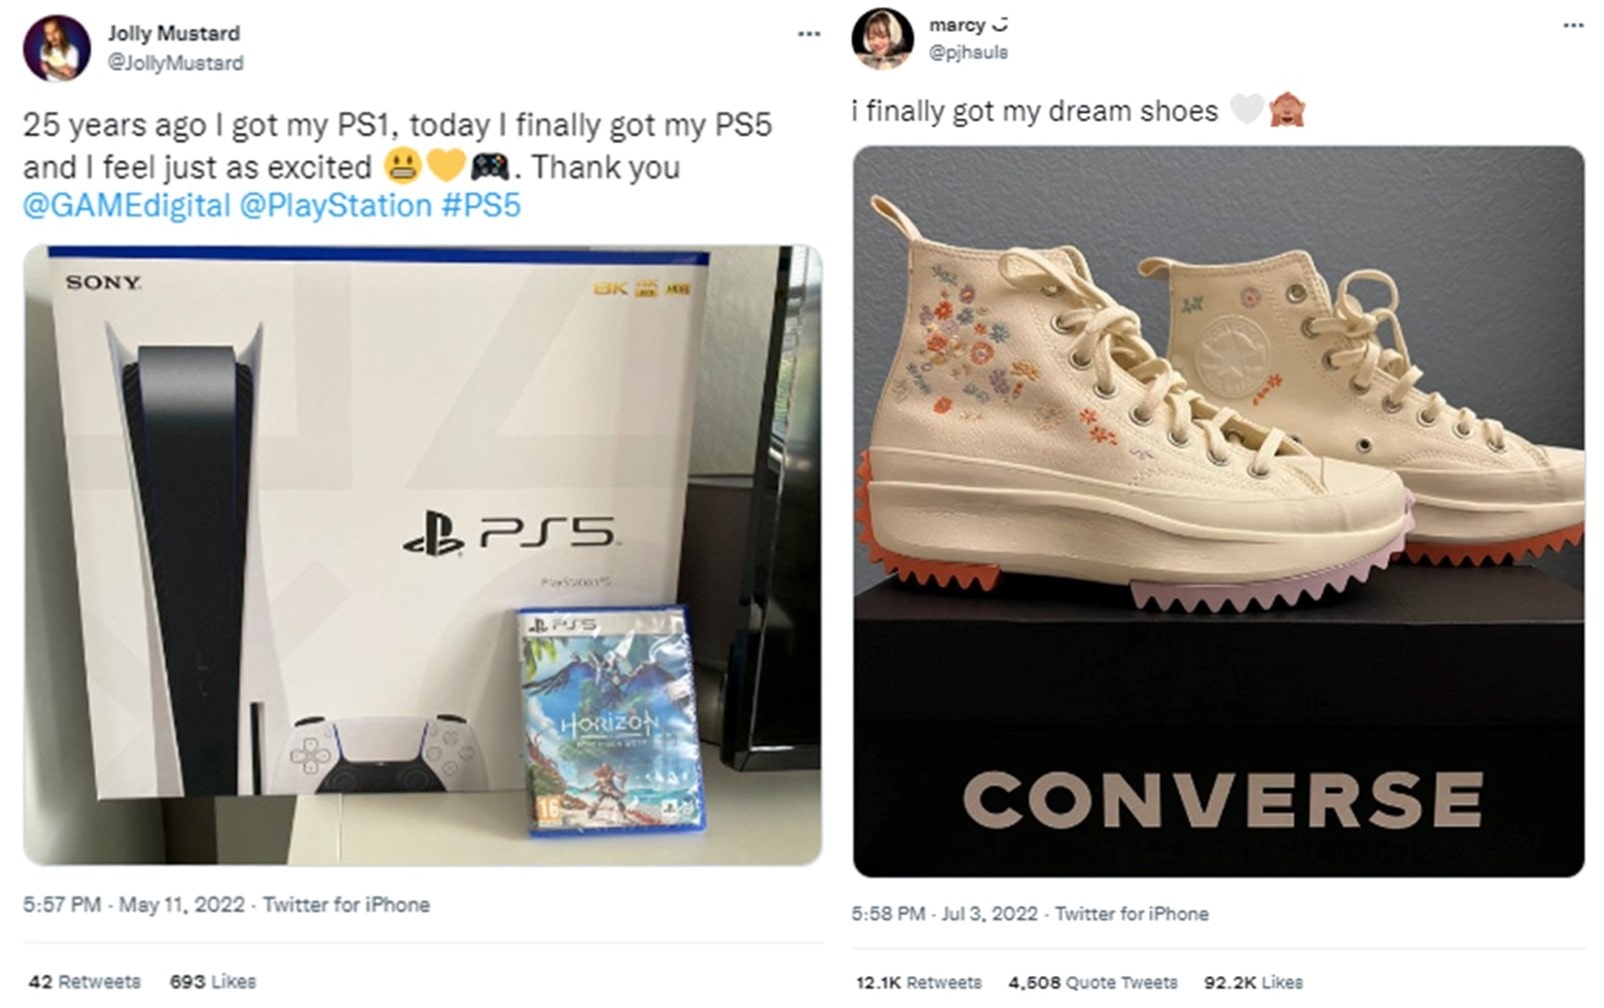 Two tweets of people happy to finally have their PS5 and their dream shoes